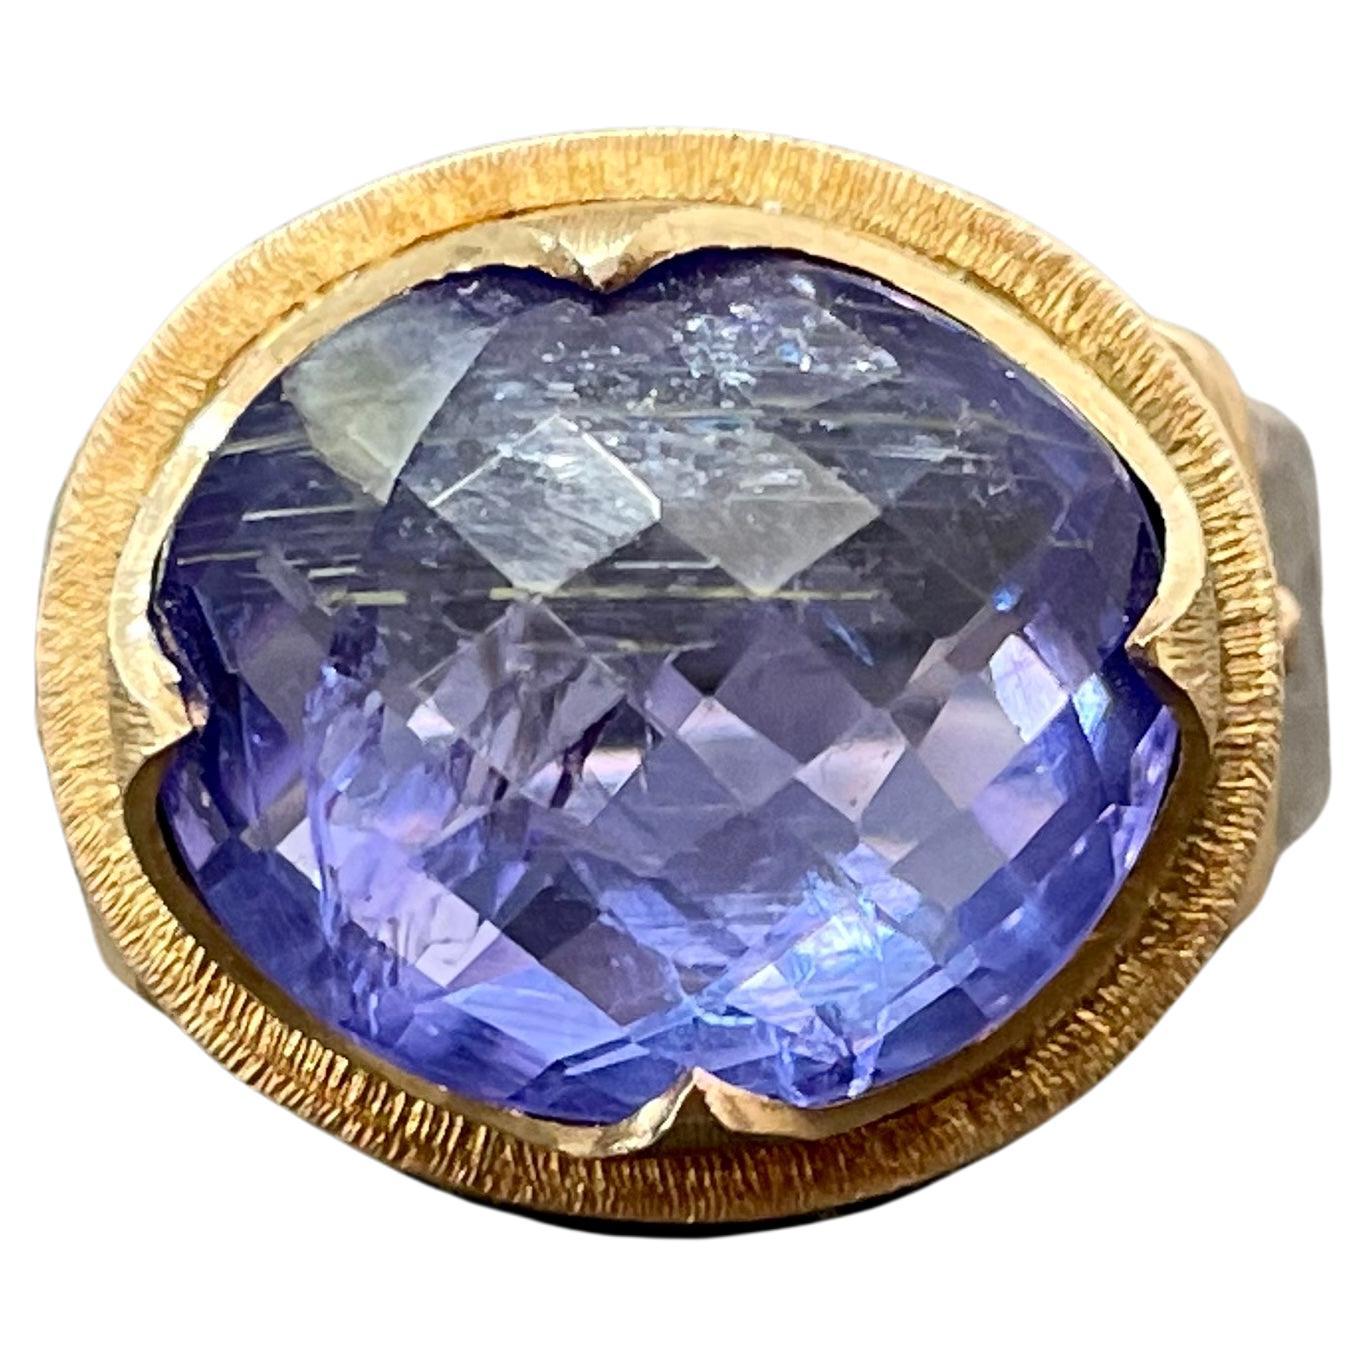 Steven Battelle 10.1 Carats Tanzanite Silver and 18k Gold Ring